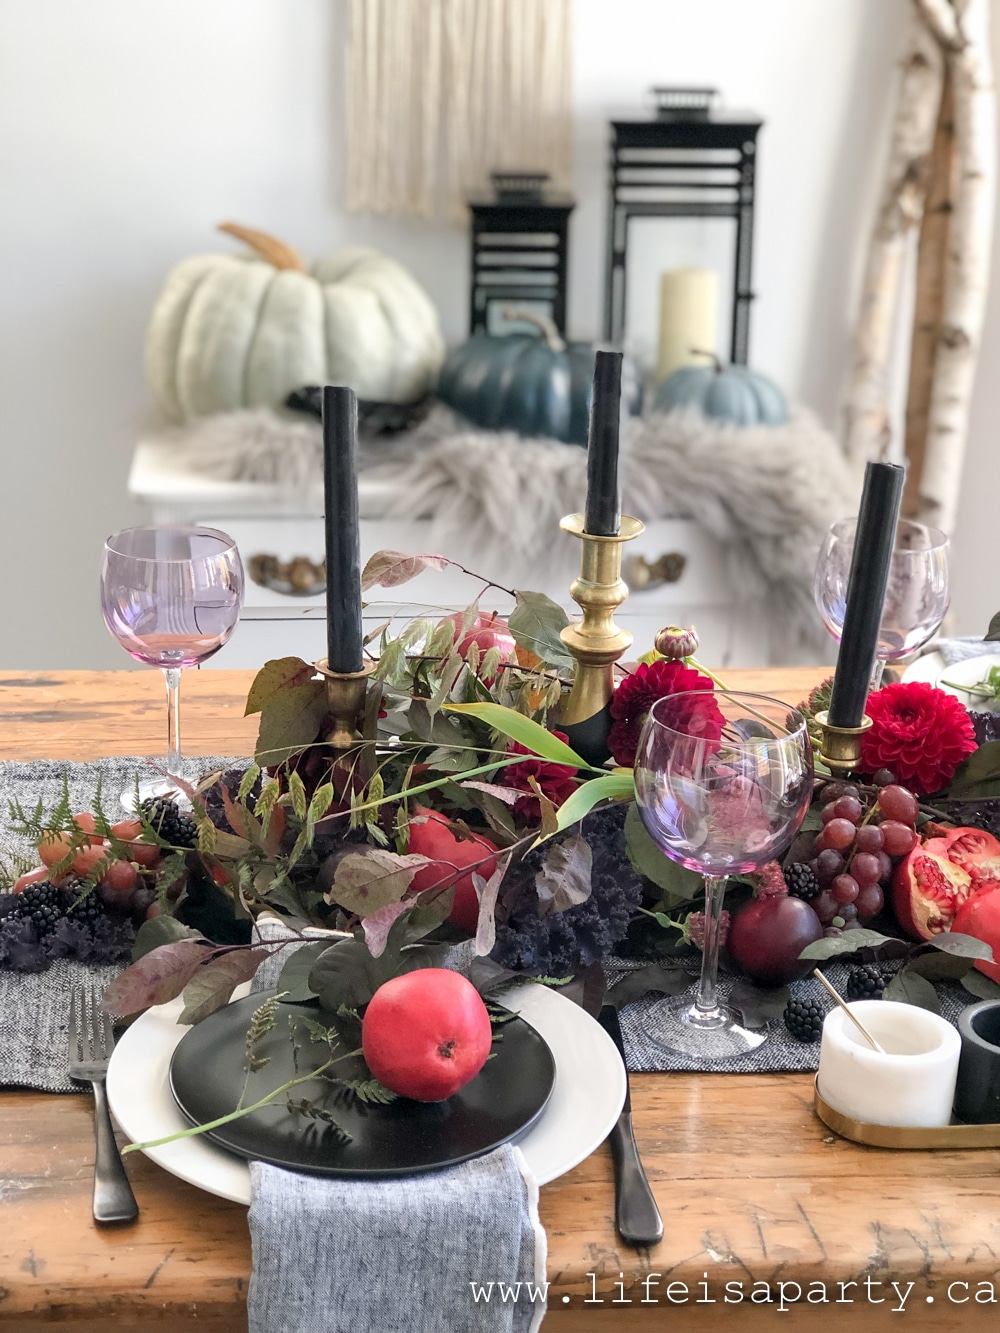 ideas for thanksgiving table